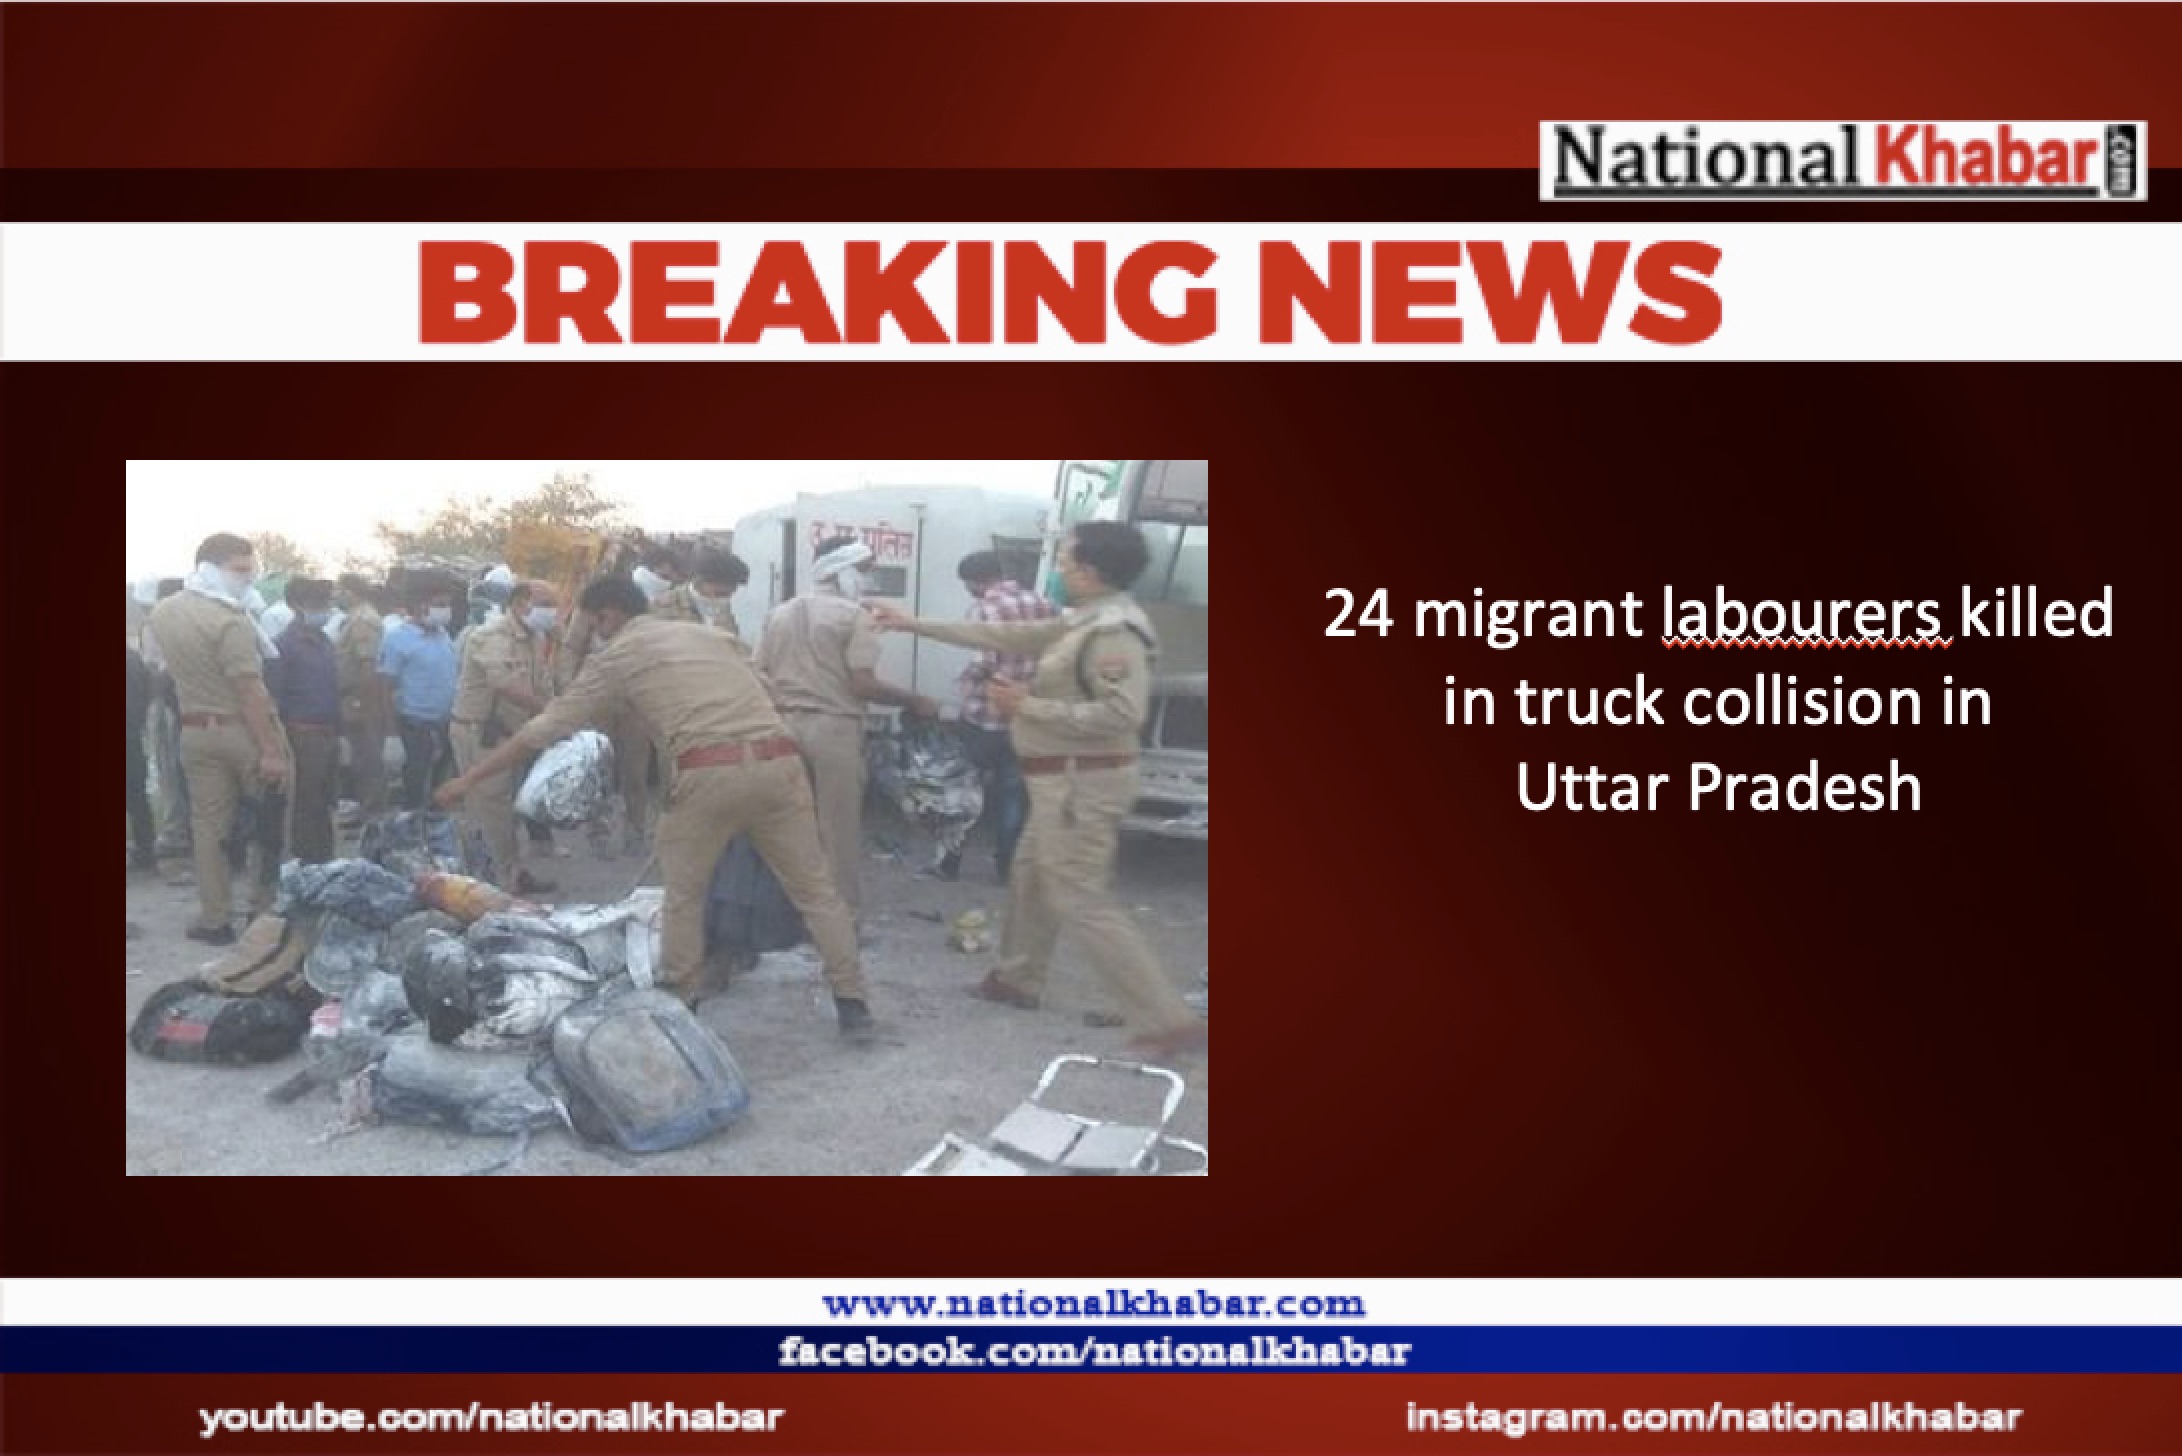 24 migrant workers were killed and several others injured in a truck collision